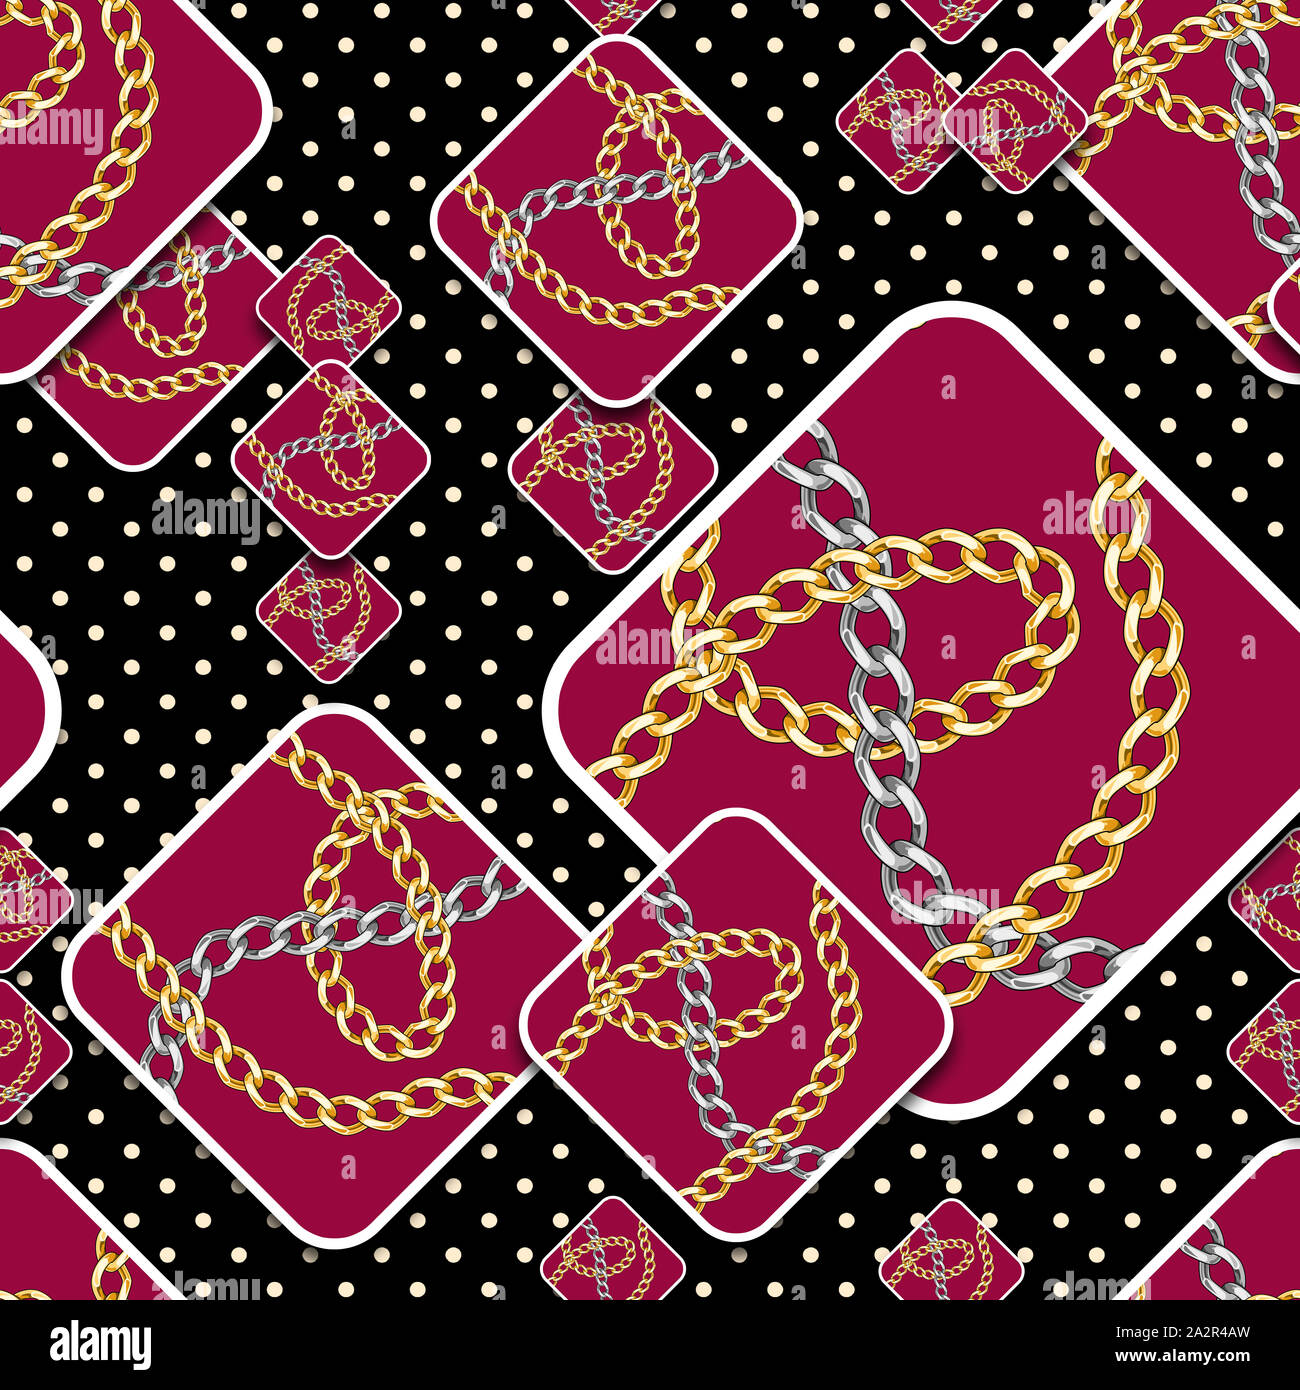 Seamless patchwork square chains pattern with dots on black